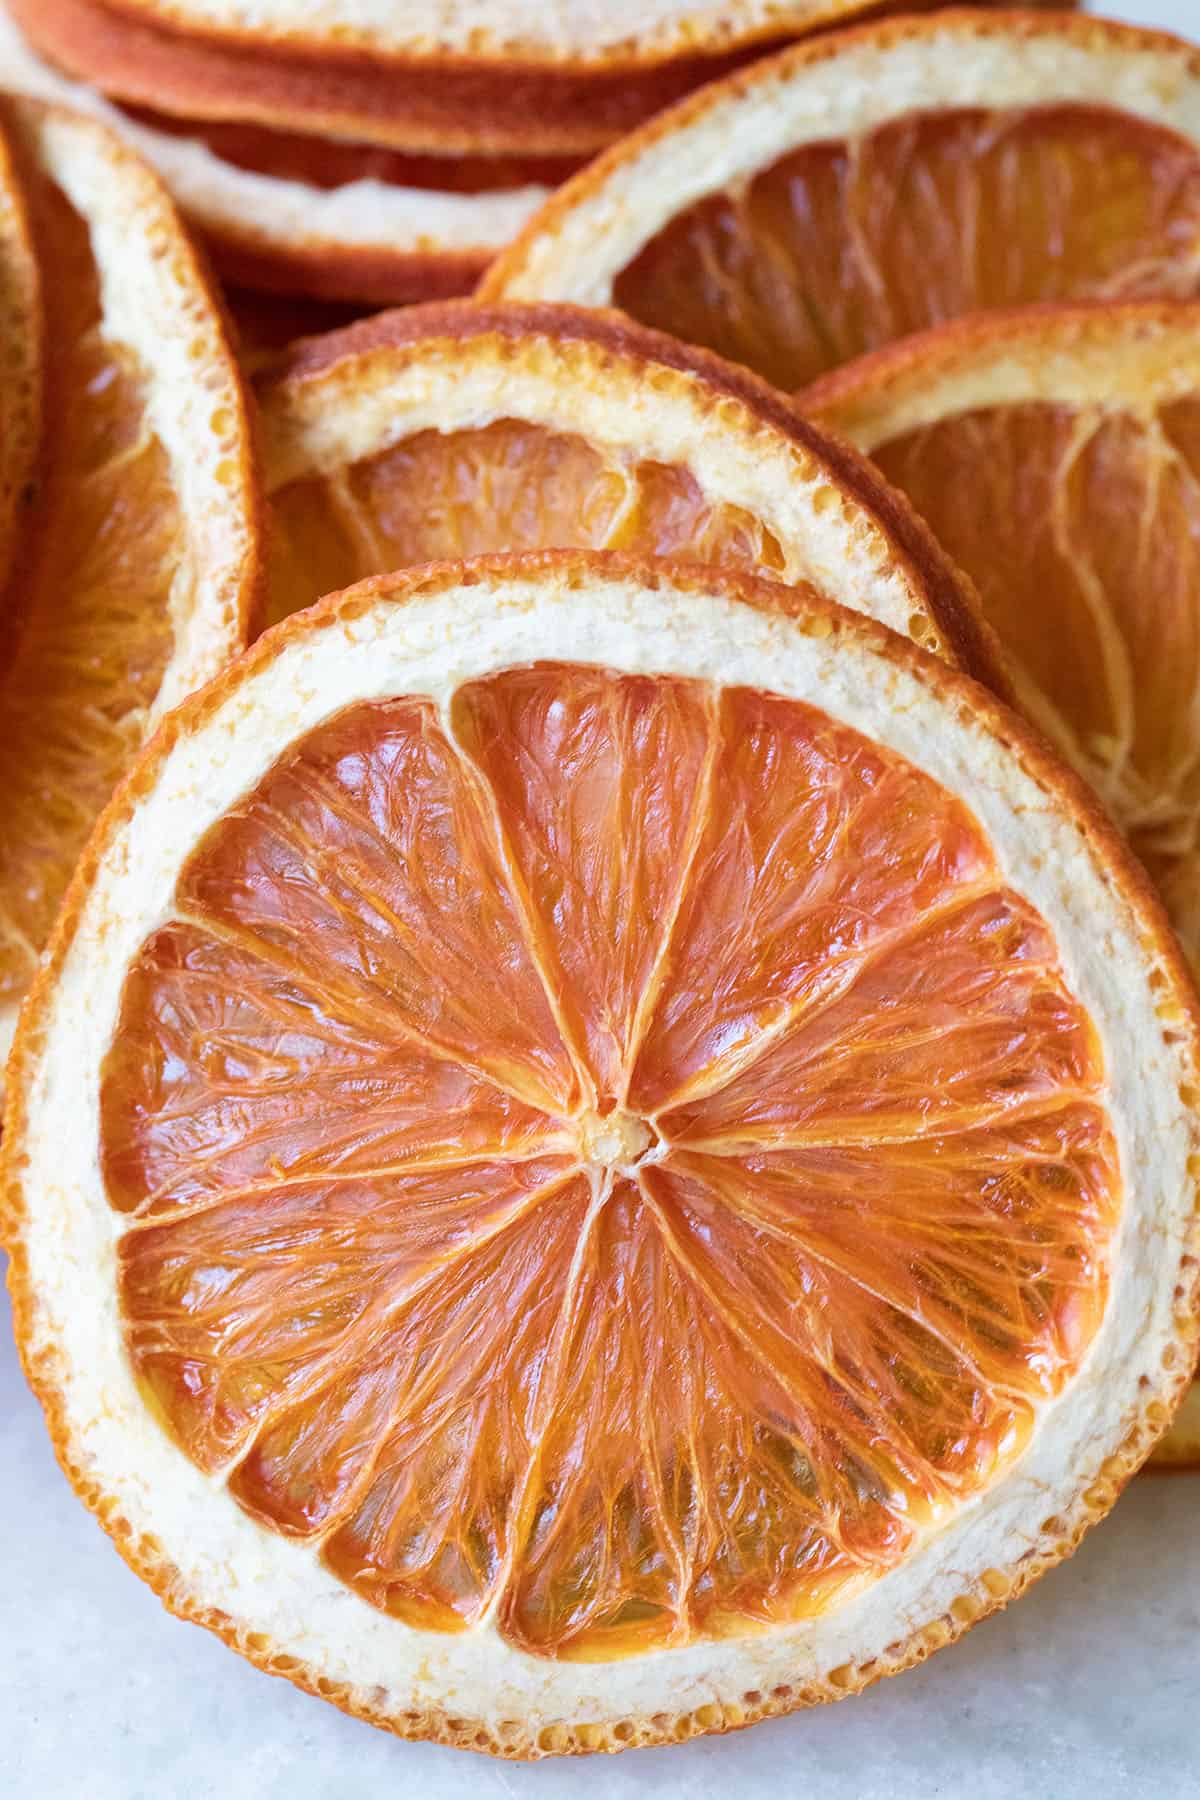 how to dehydrate oranges